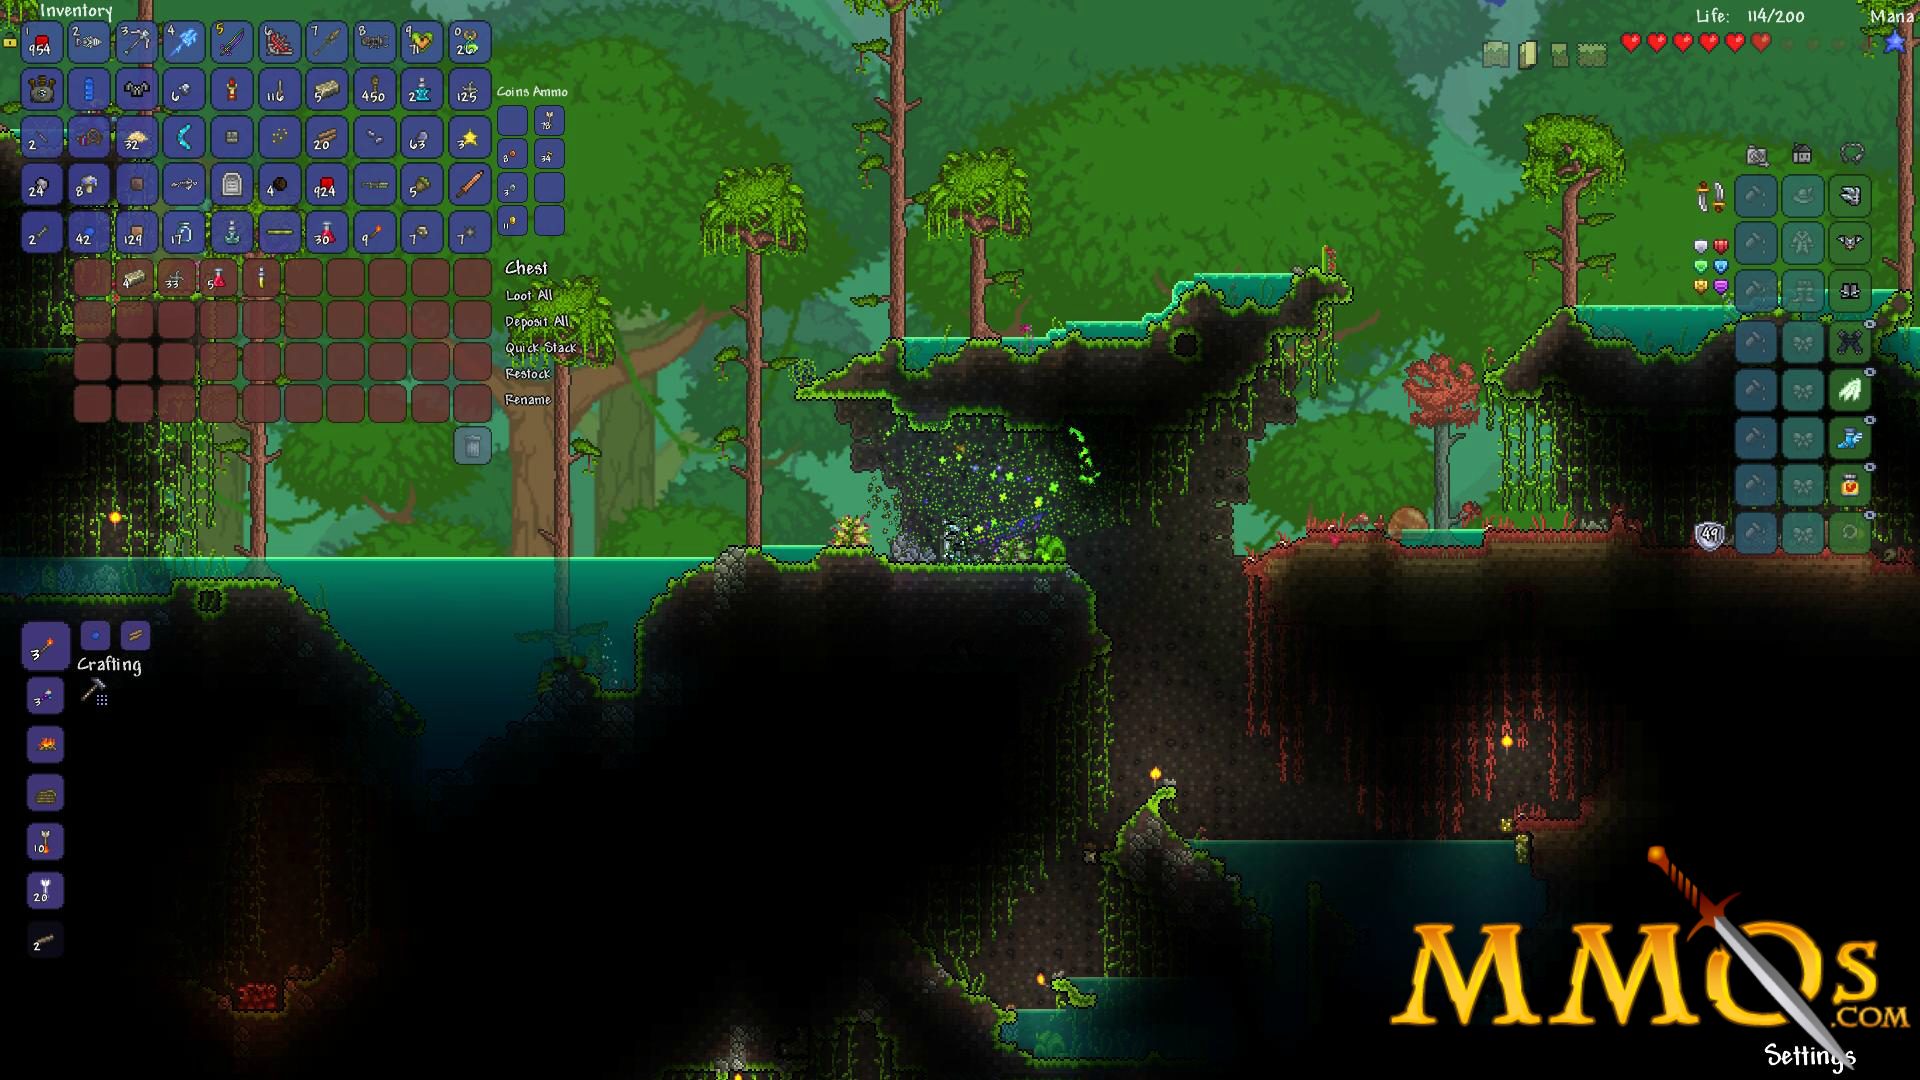 Terraria Review - Building Your Own Fun In A Dangerous World - Game Informer